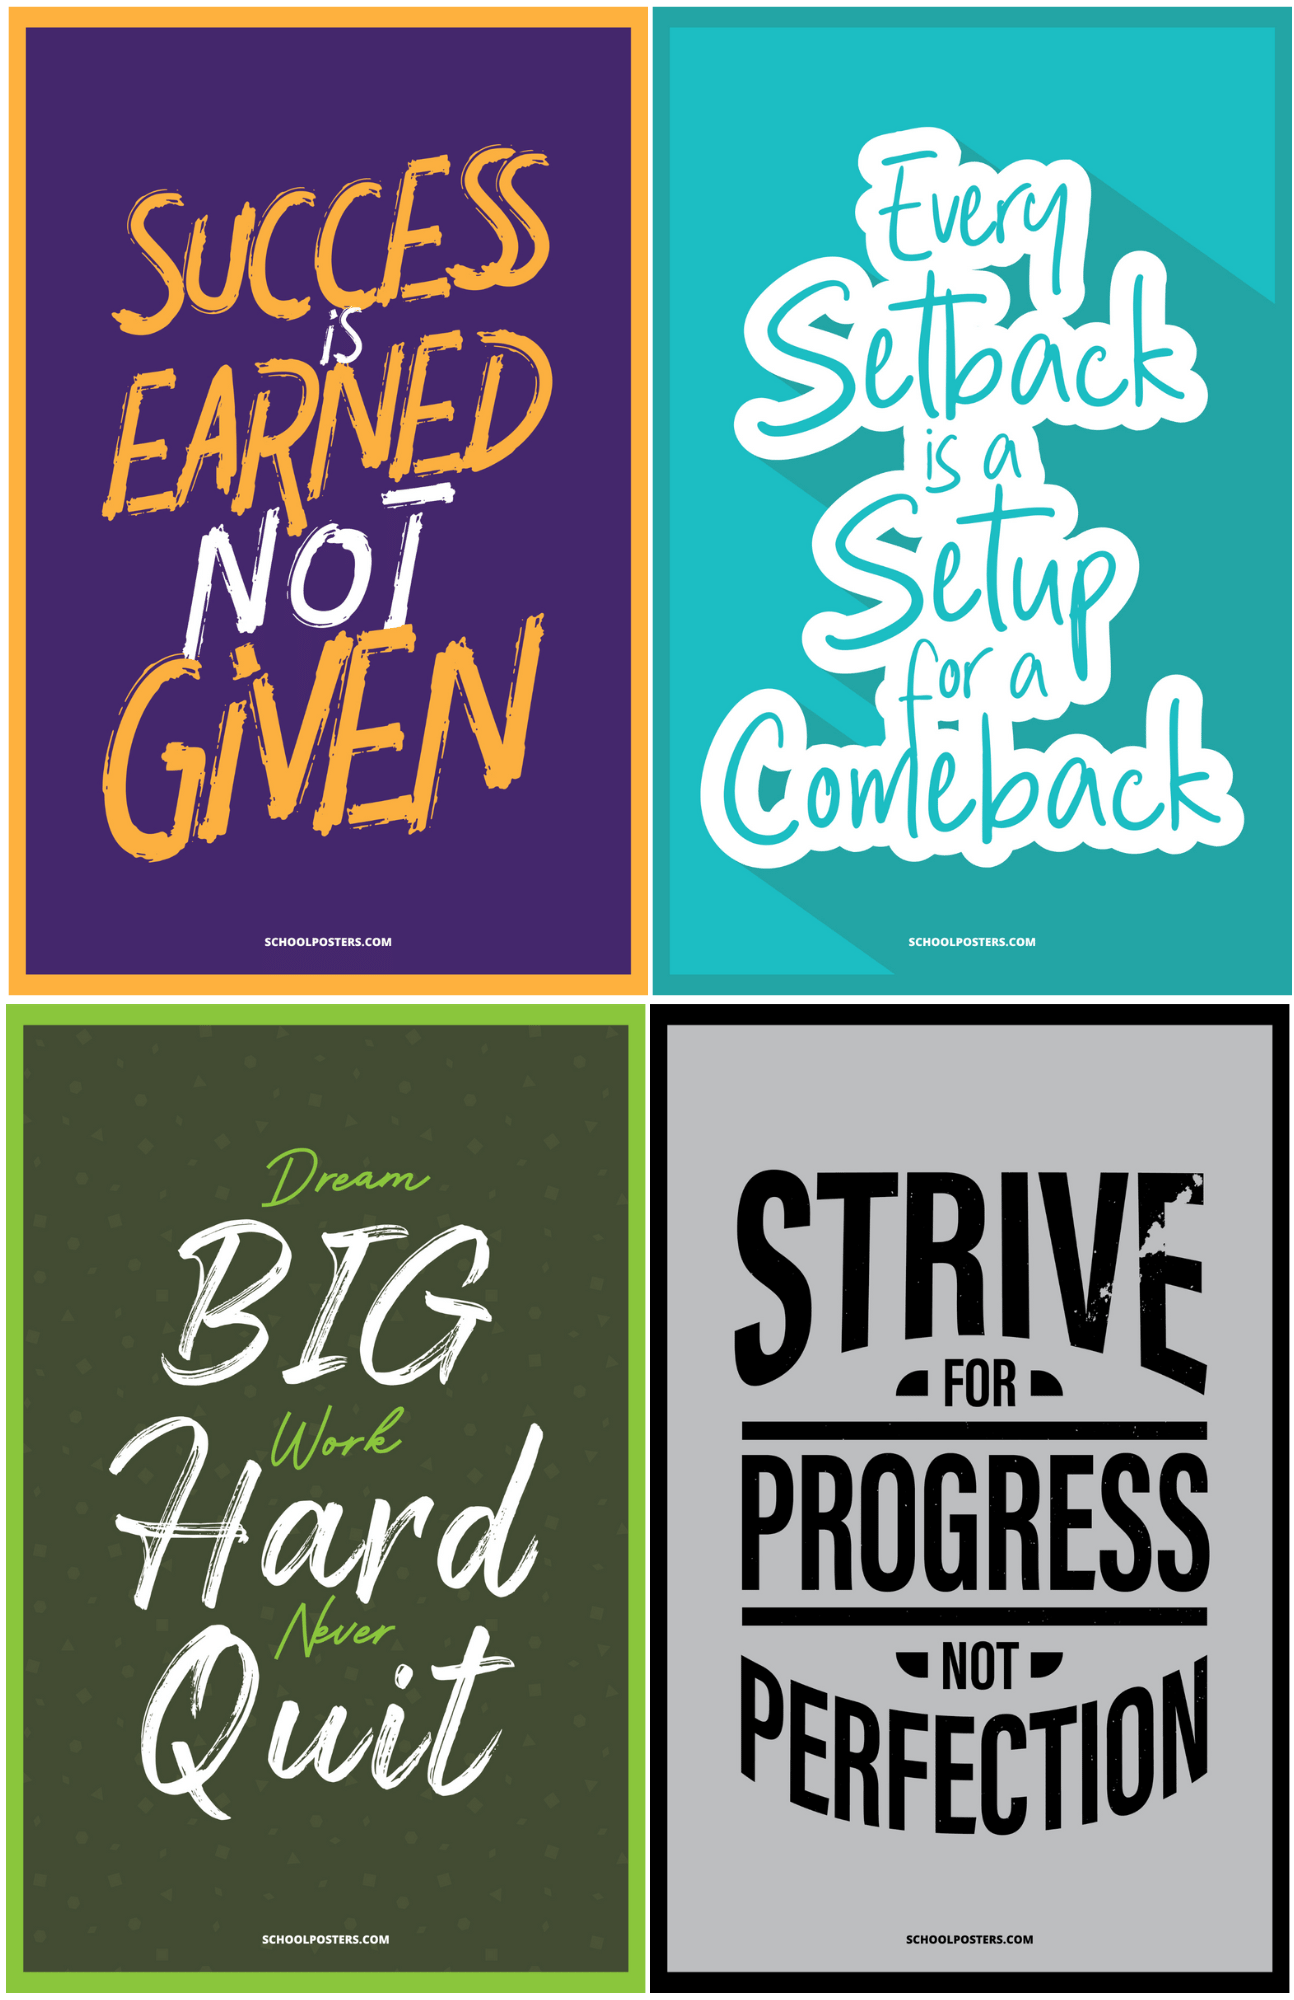 Perseverance Poster Package